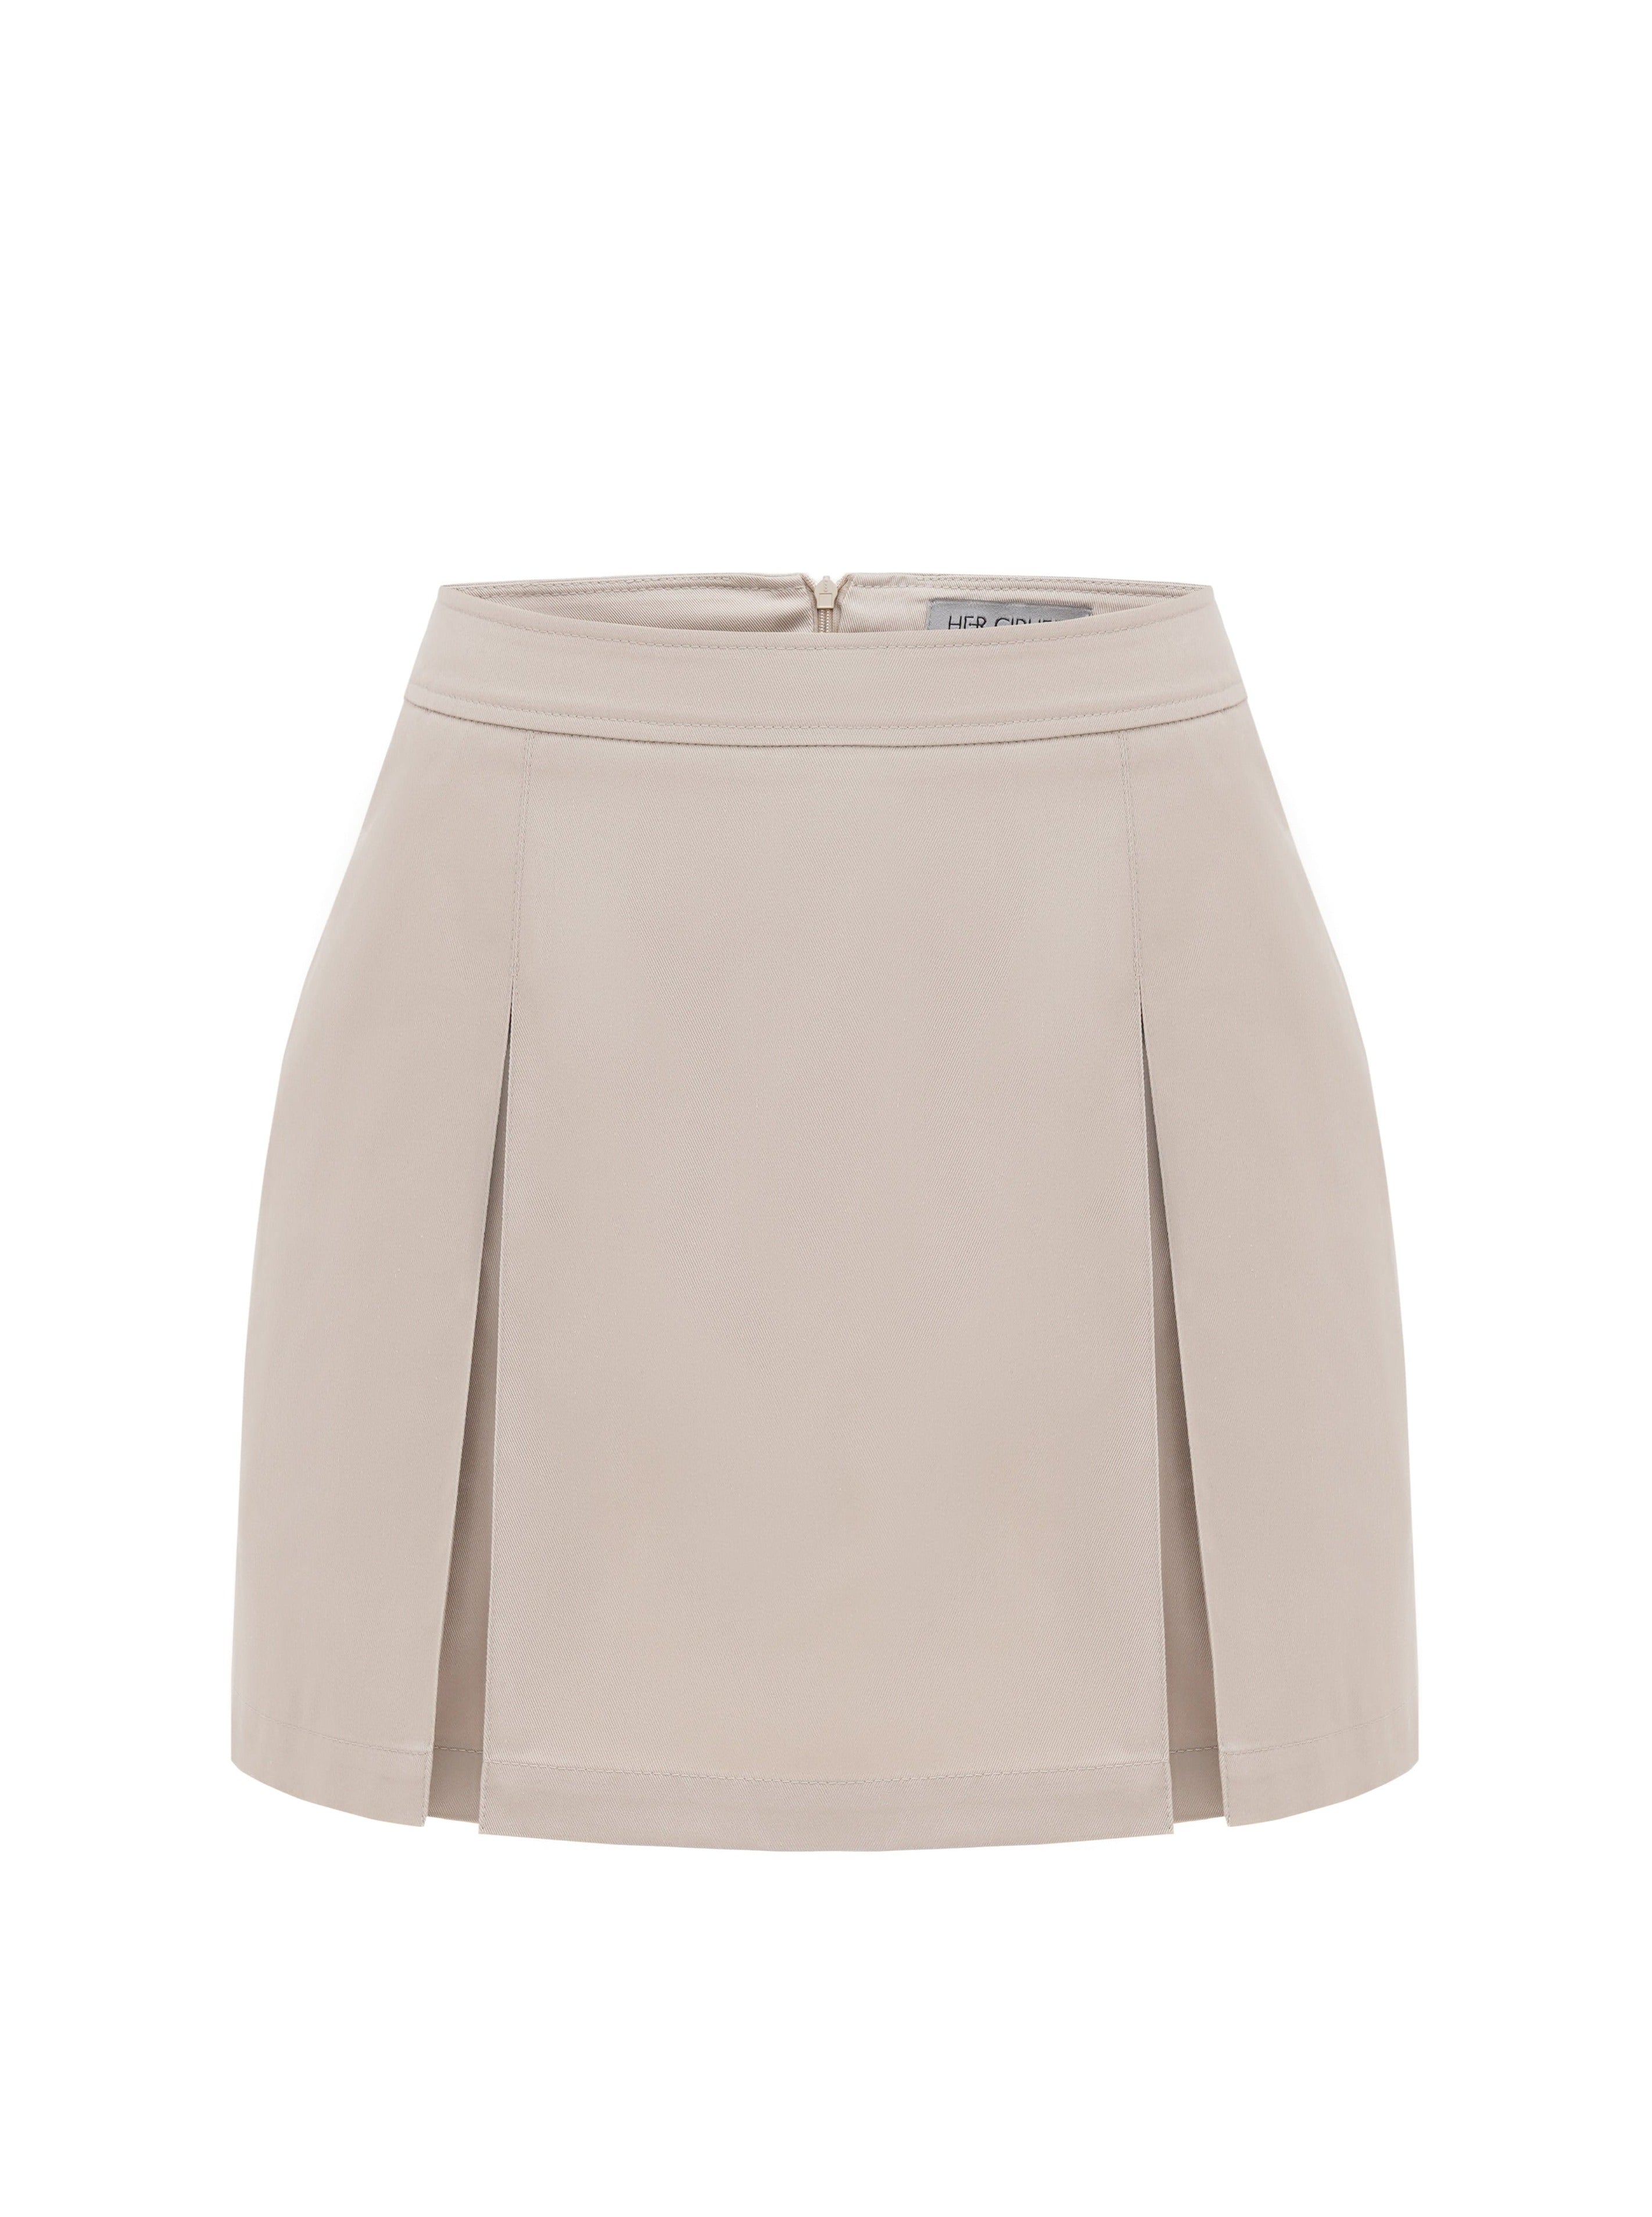 SeaSycle mini pleated skirt beige color created from a blend of recycled polyester and organic cotton